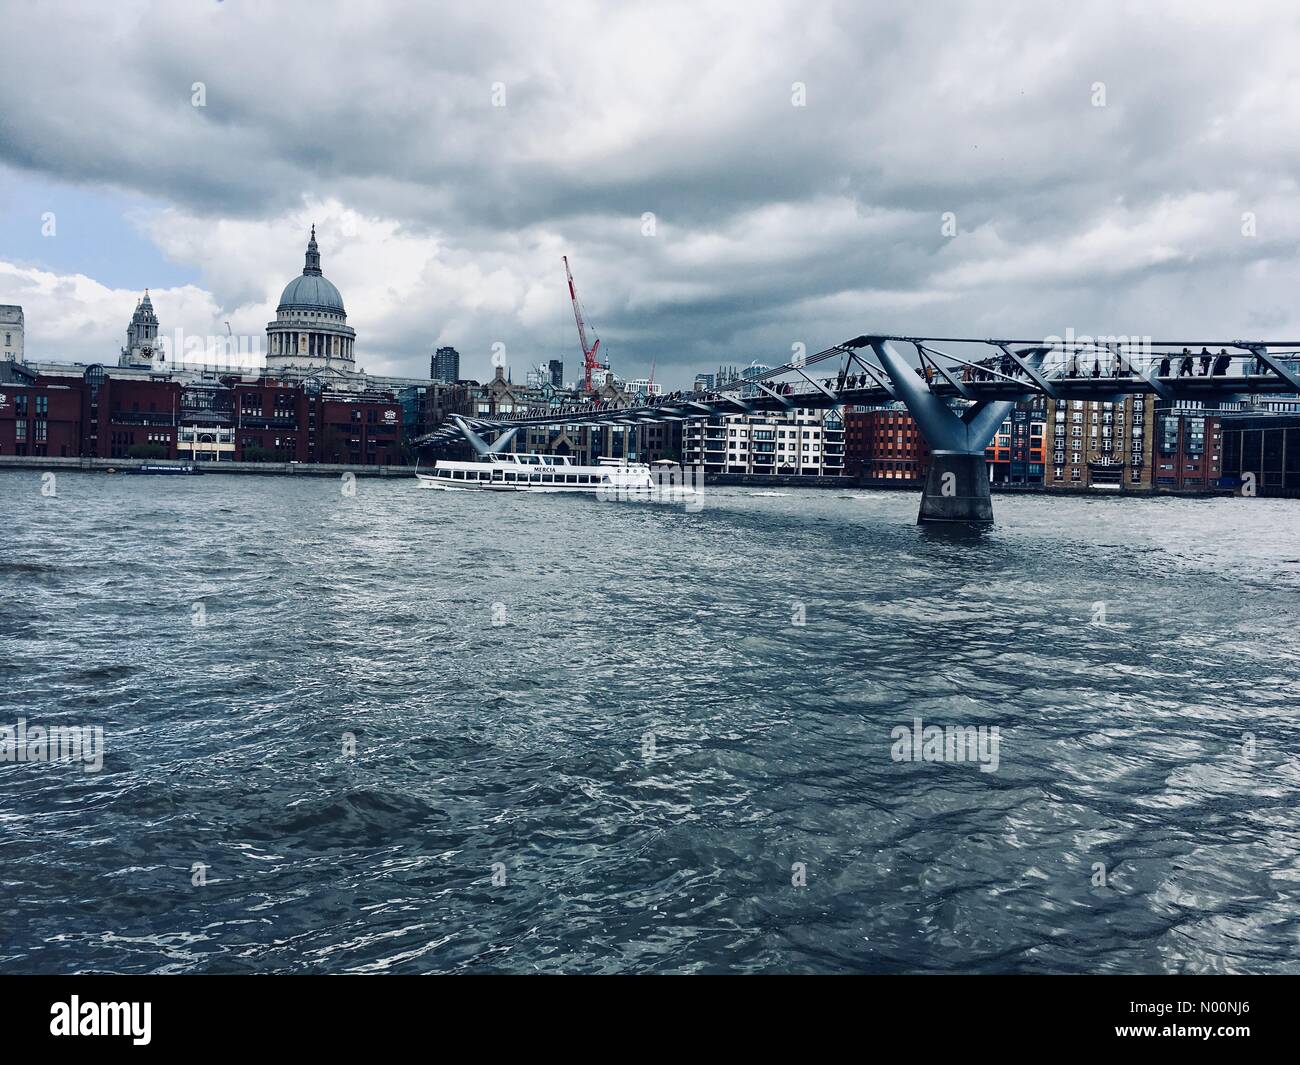 UK Weather - 26 April 2018 A cold and chilly day in London at Millennium Bridge on the River Thames with a view of Saint Paul’s Cathedral. Stock Photo